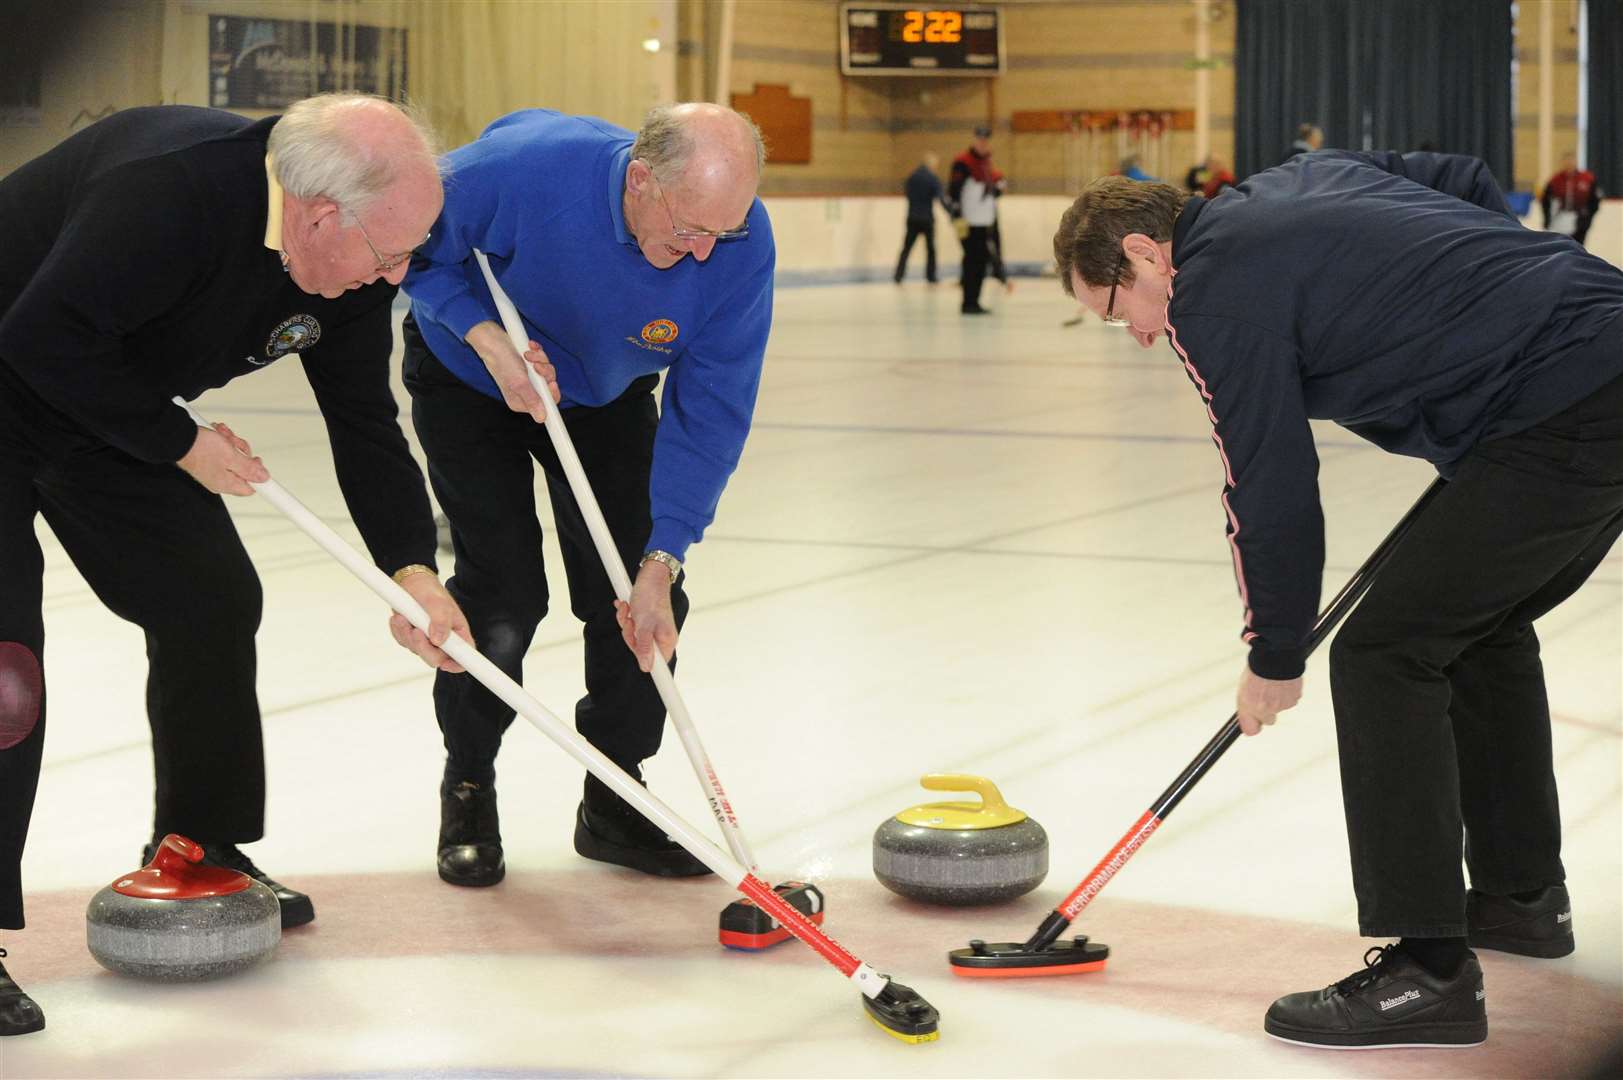 Curling at Moray Leisure Centre has resumed.